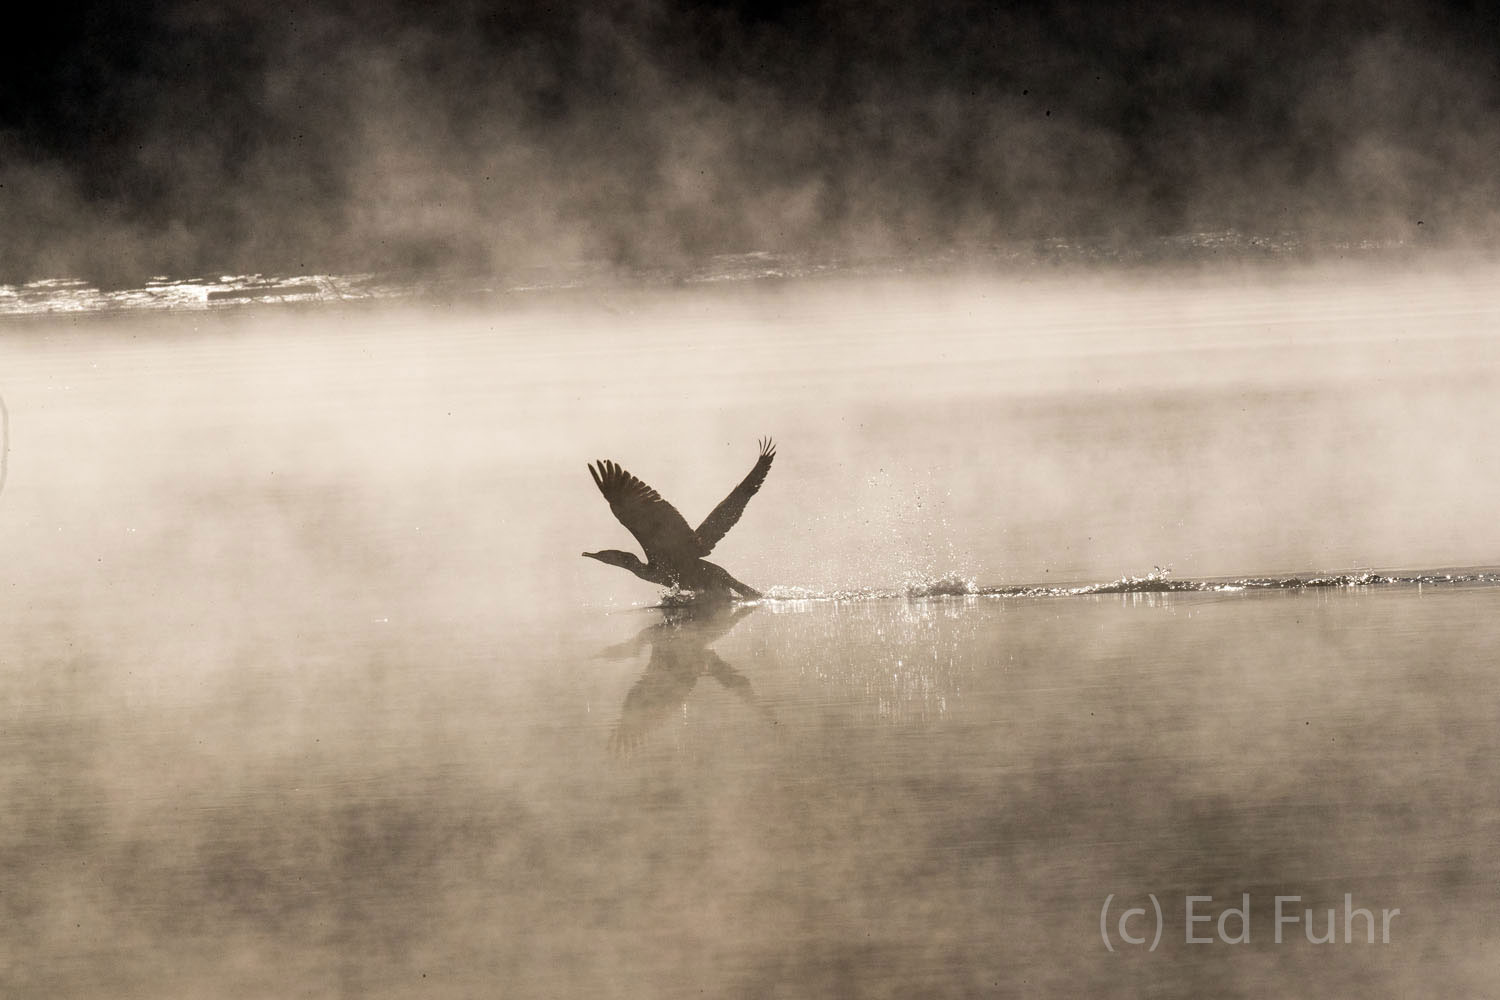 A cormorant lifts off from the fog shrouded waters of the James River, Virginia.